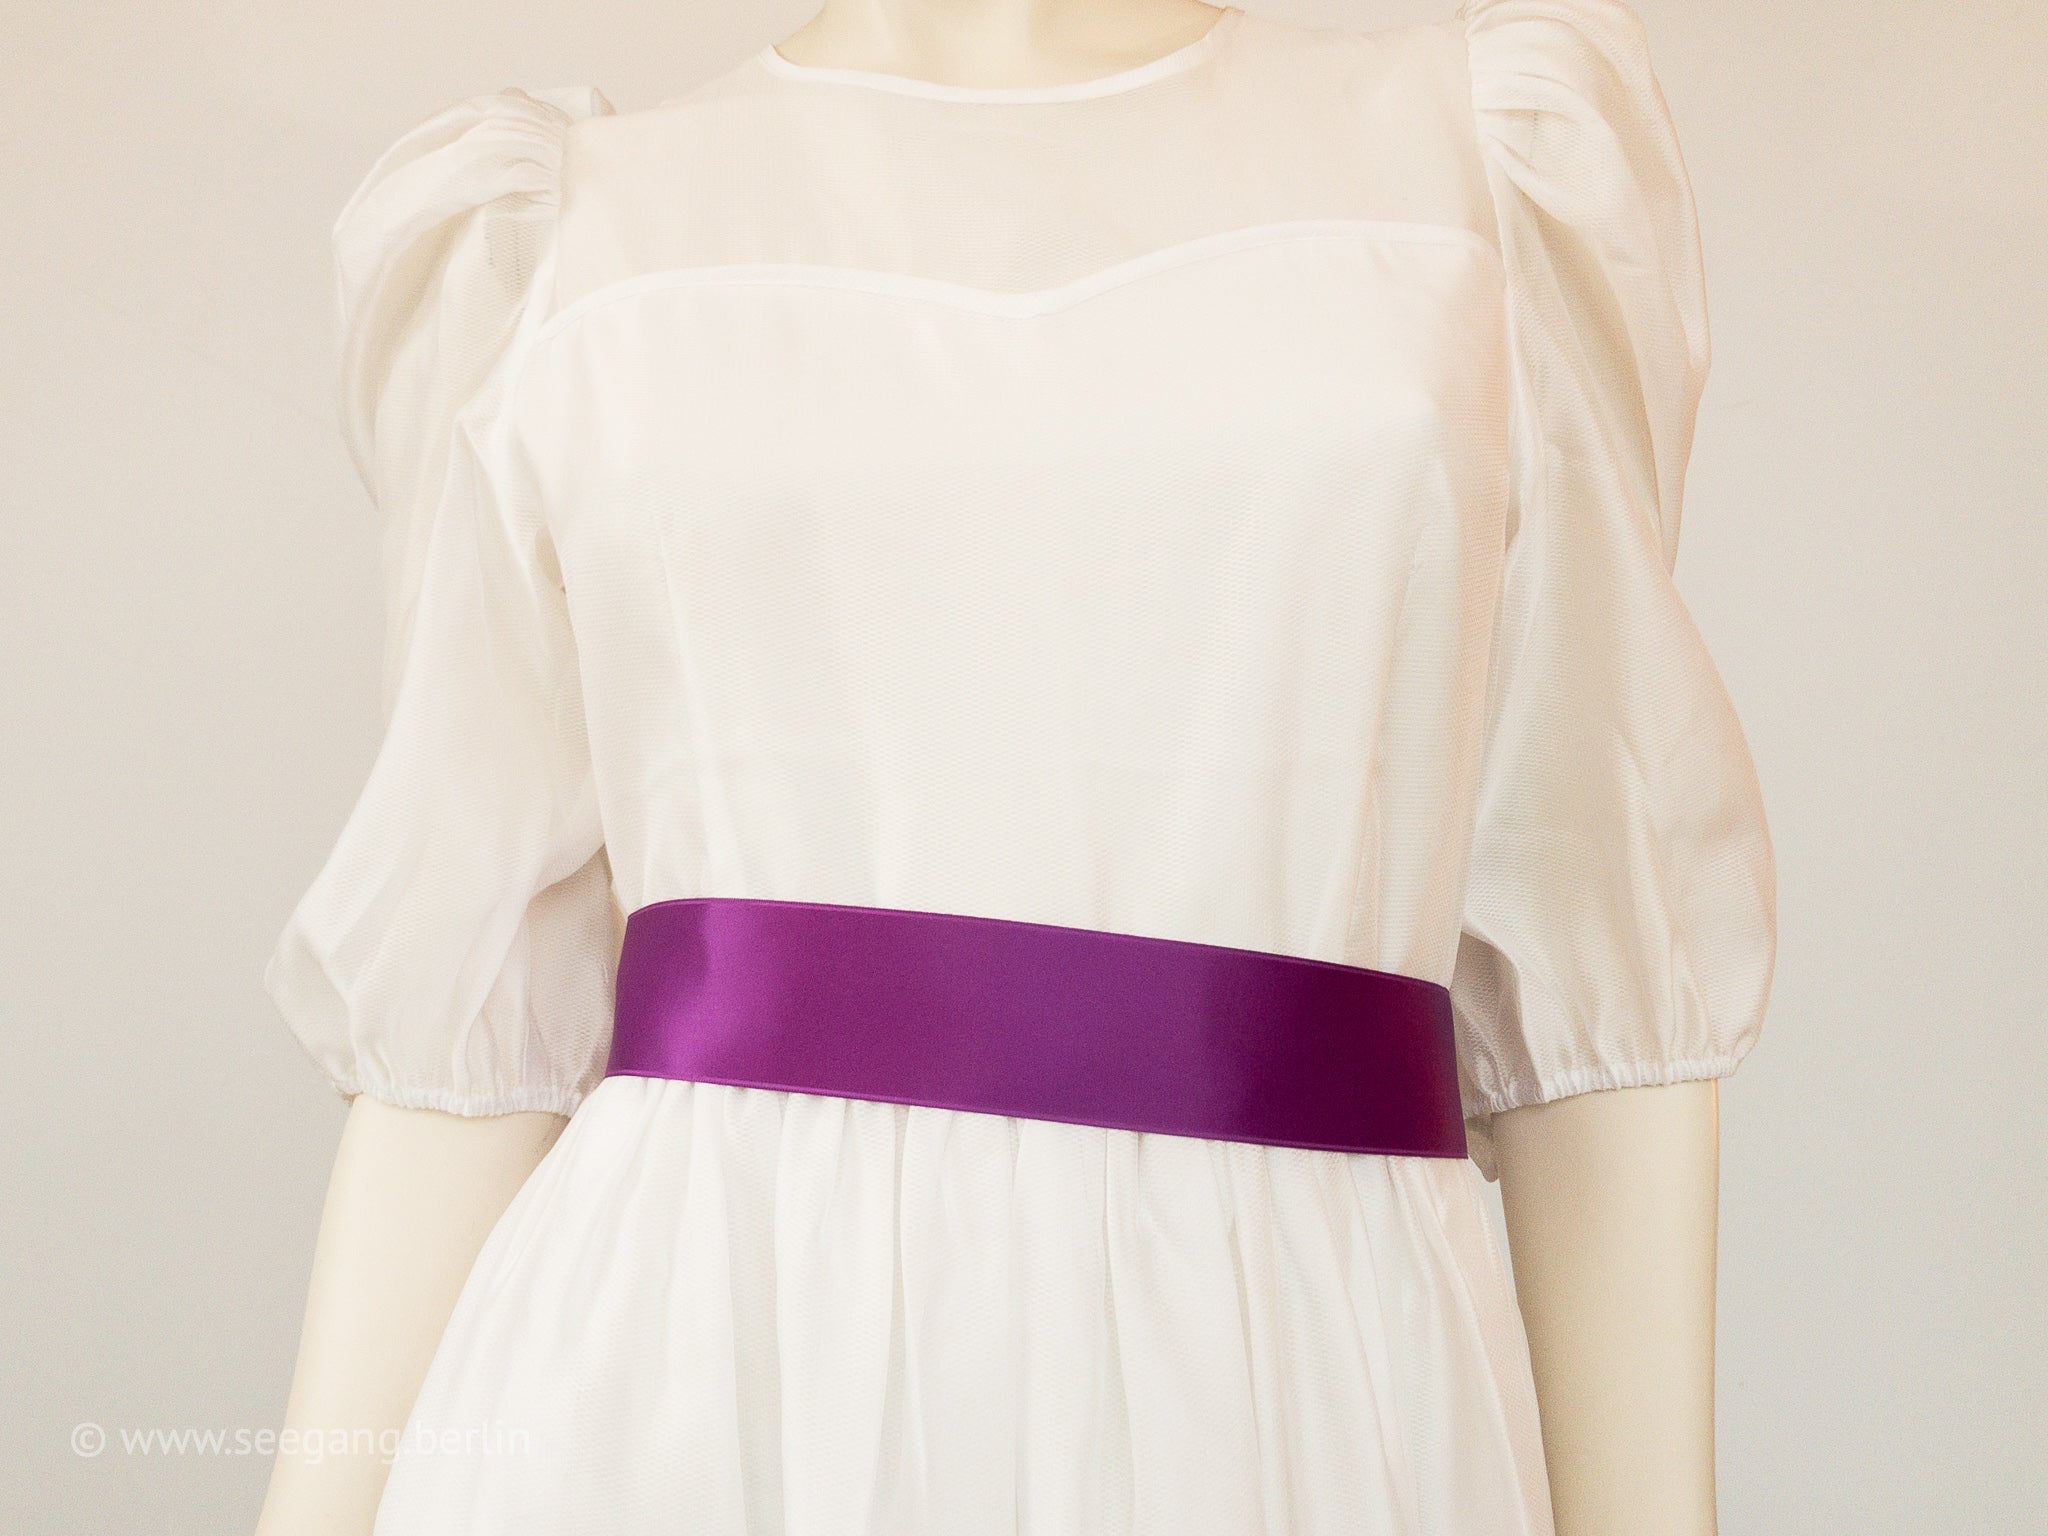 BRIDAL BELT IN MANY SHADES OF LILAC - SWISS QUALITY!